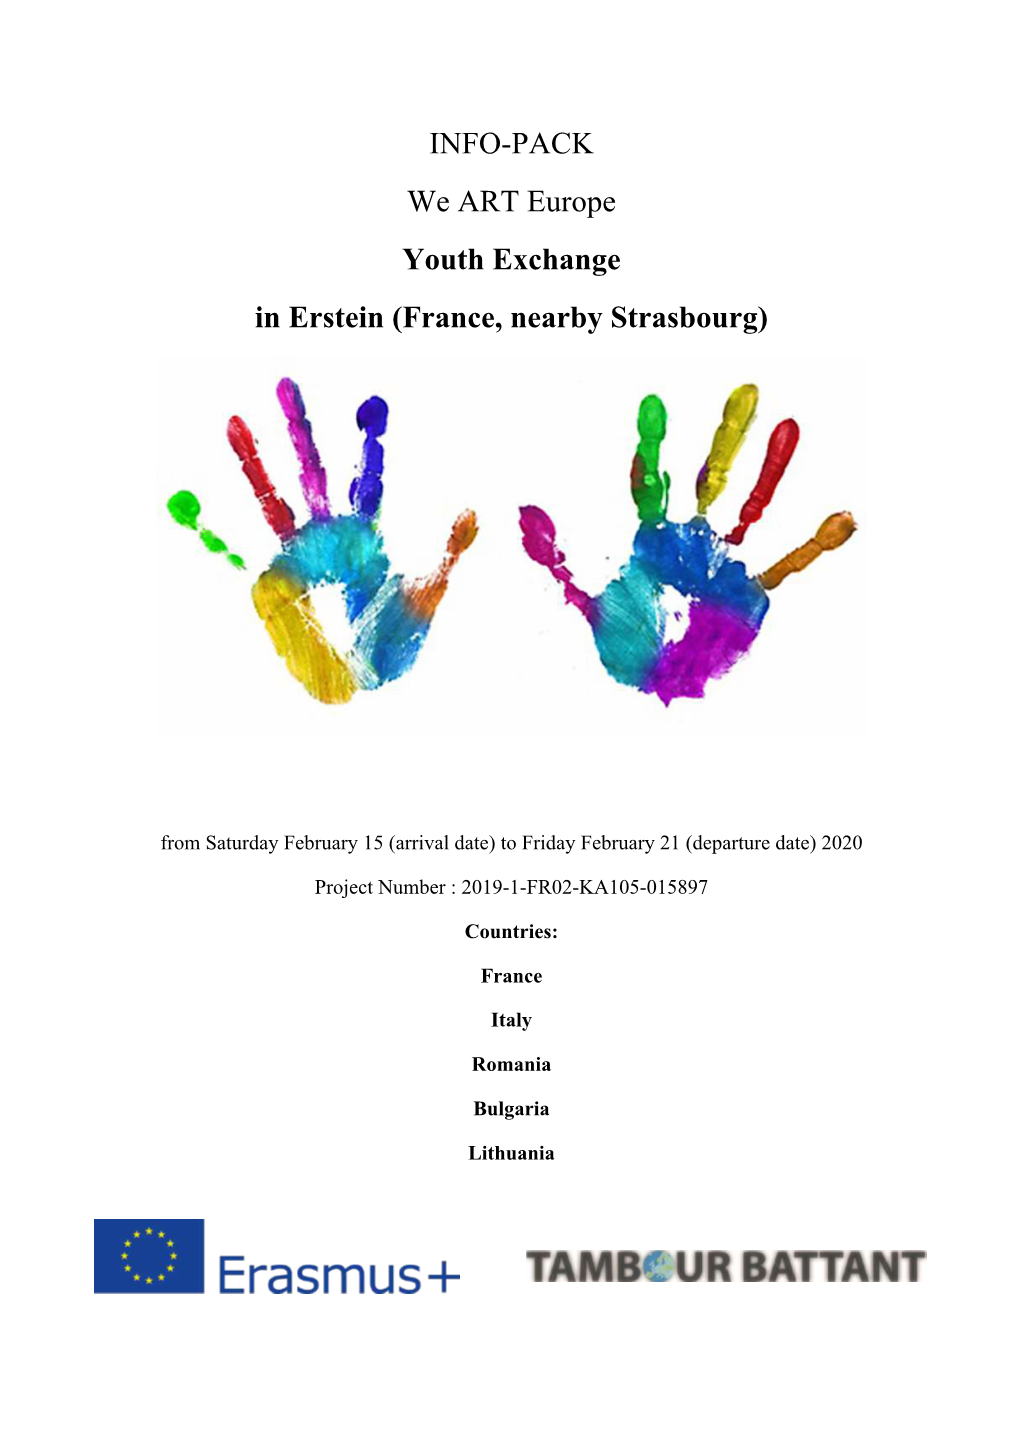 INFO-PACK We ART Europe Youth Exchange in Erstein (France, Nearby Strasbourg)